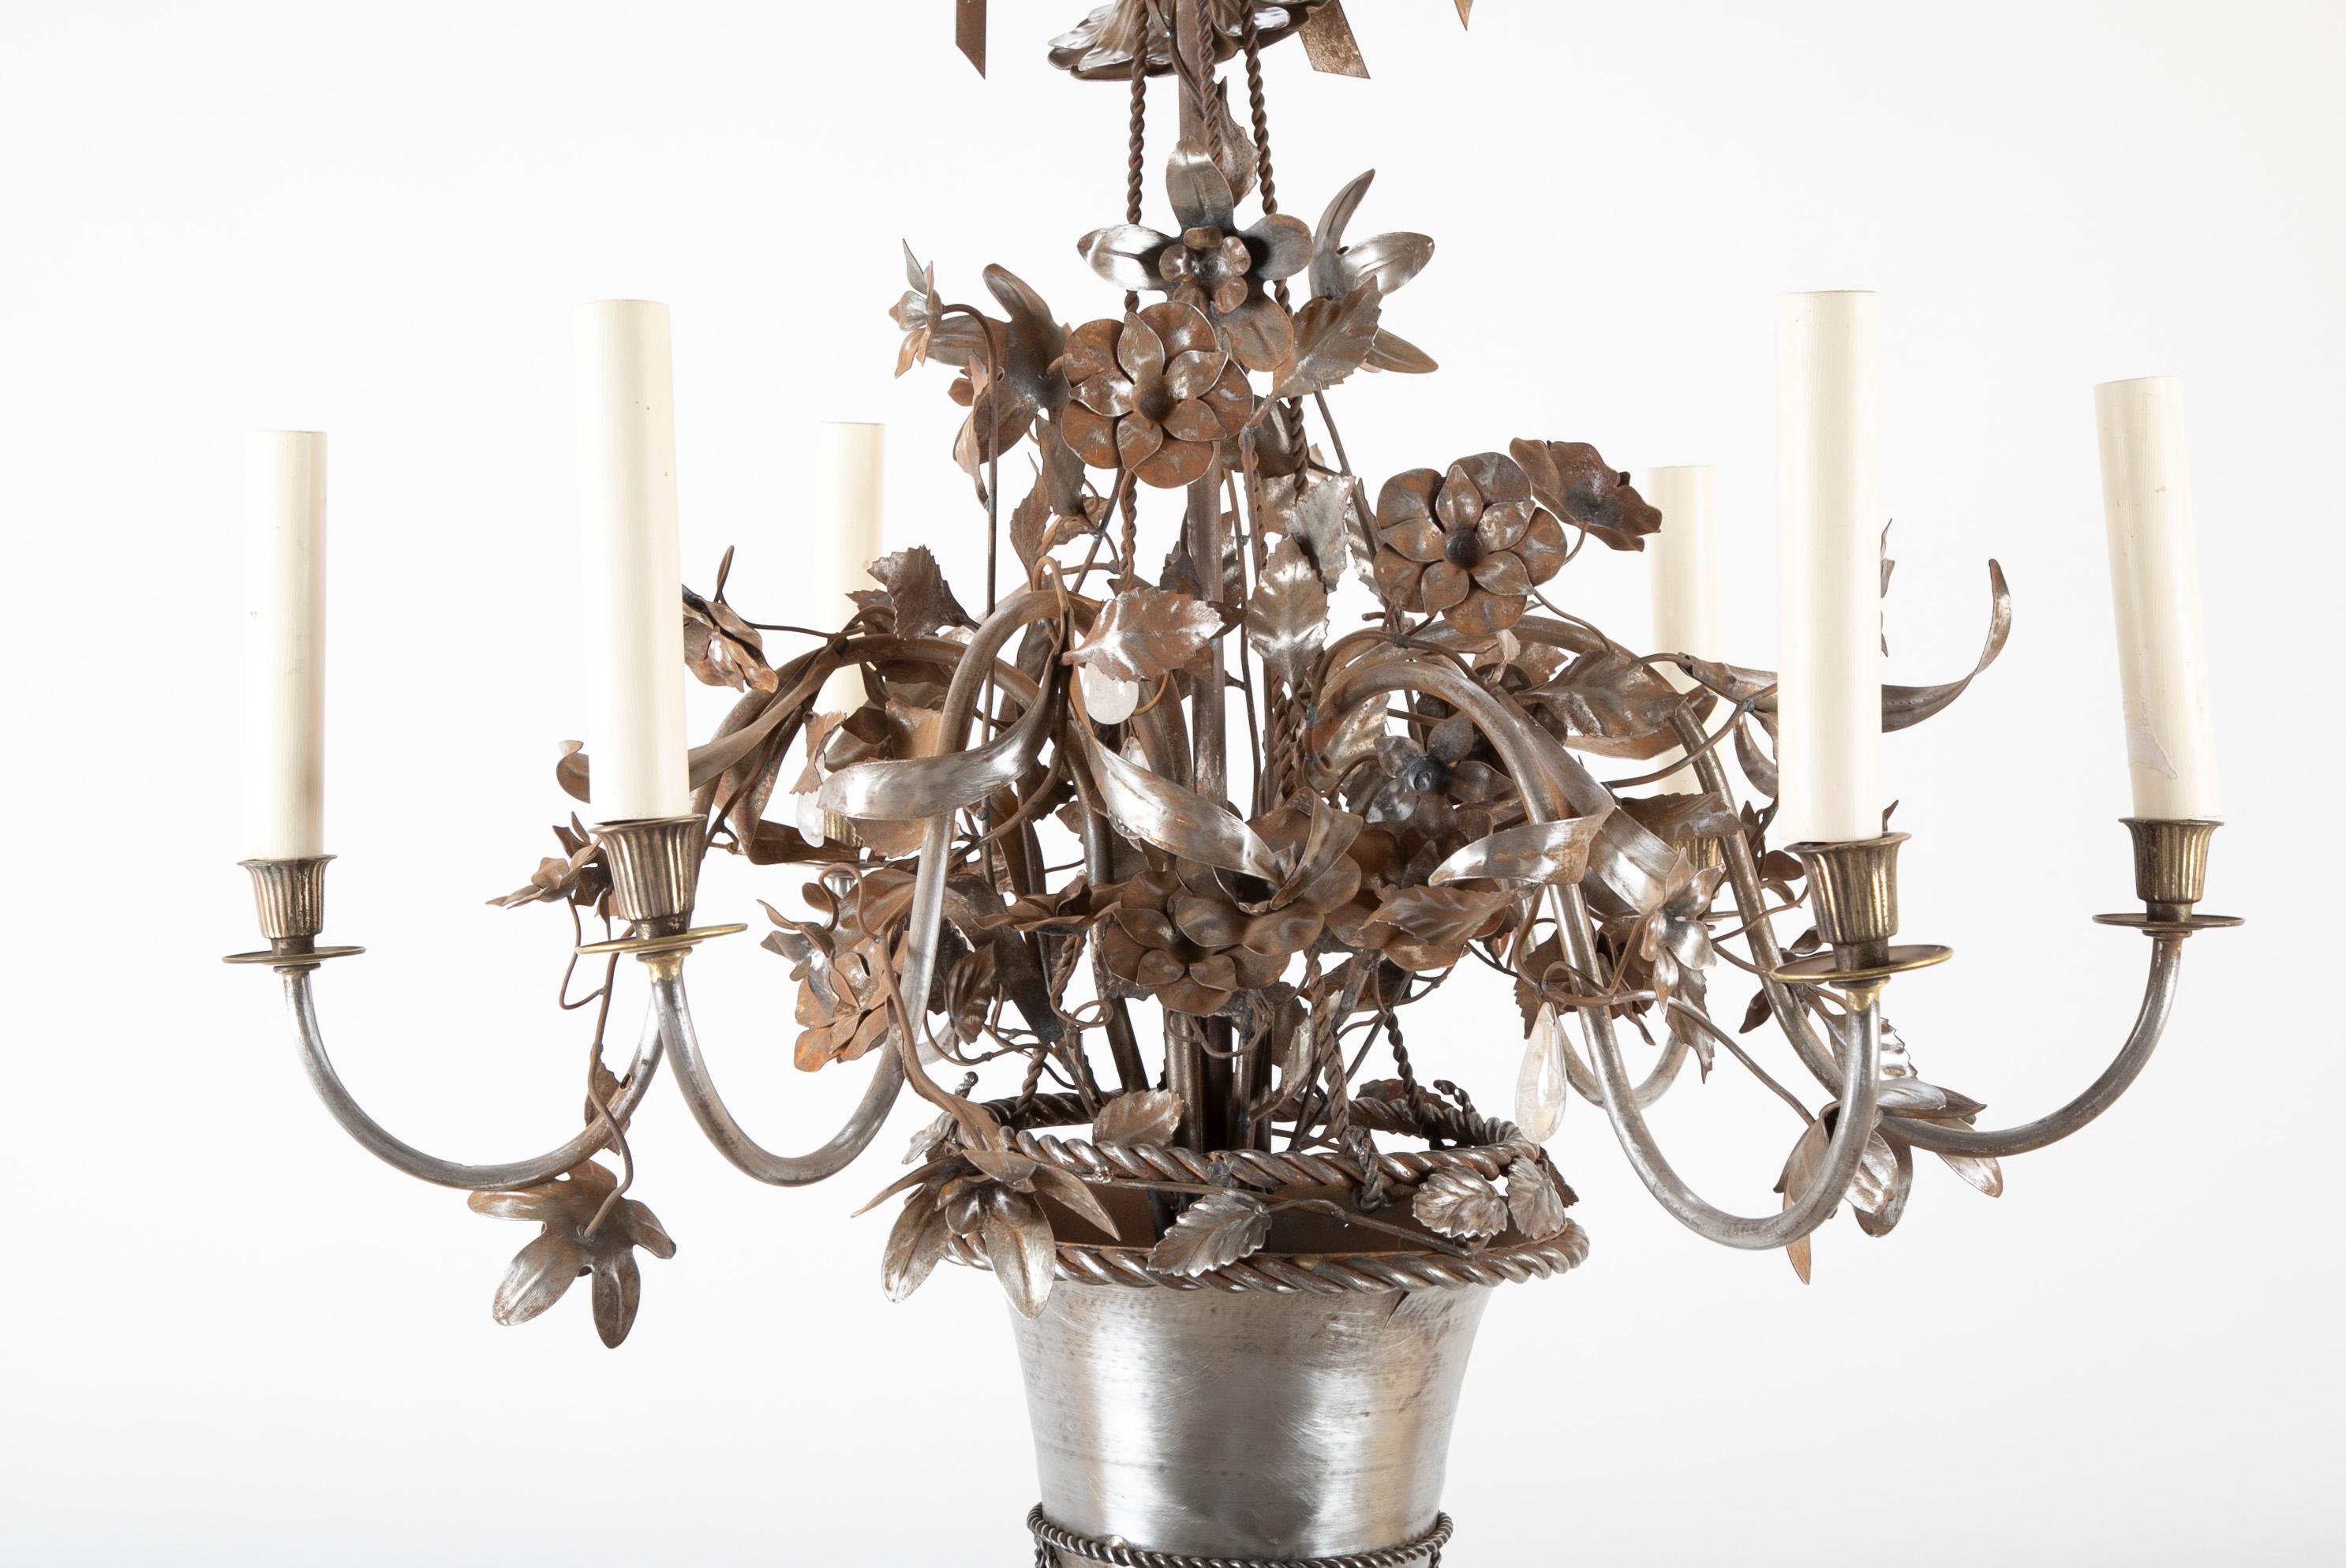 Vintage Steel Floral Chandelier with Basket, Bow Knots and Ribbons In Good Condition For Sale In Stamford, CT